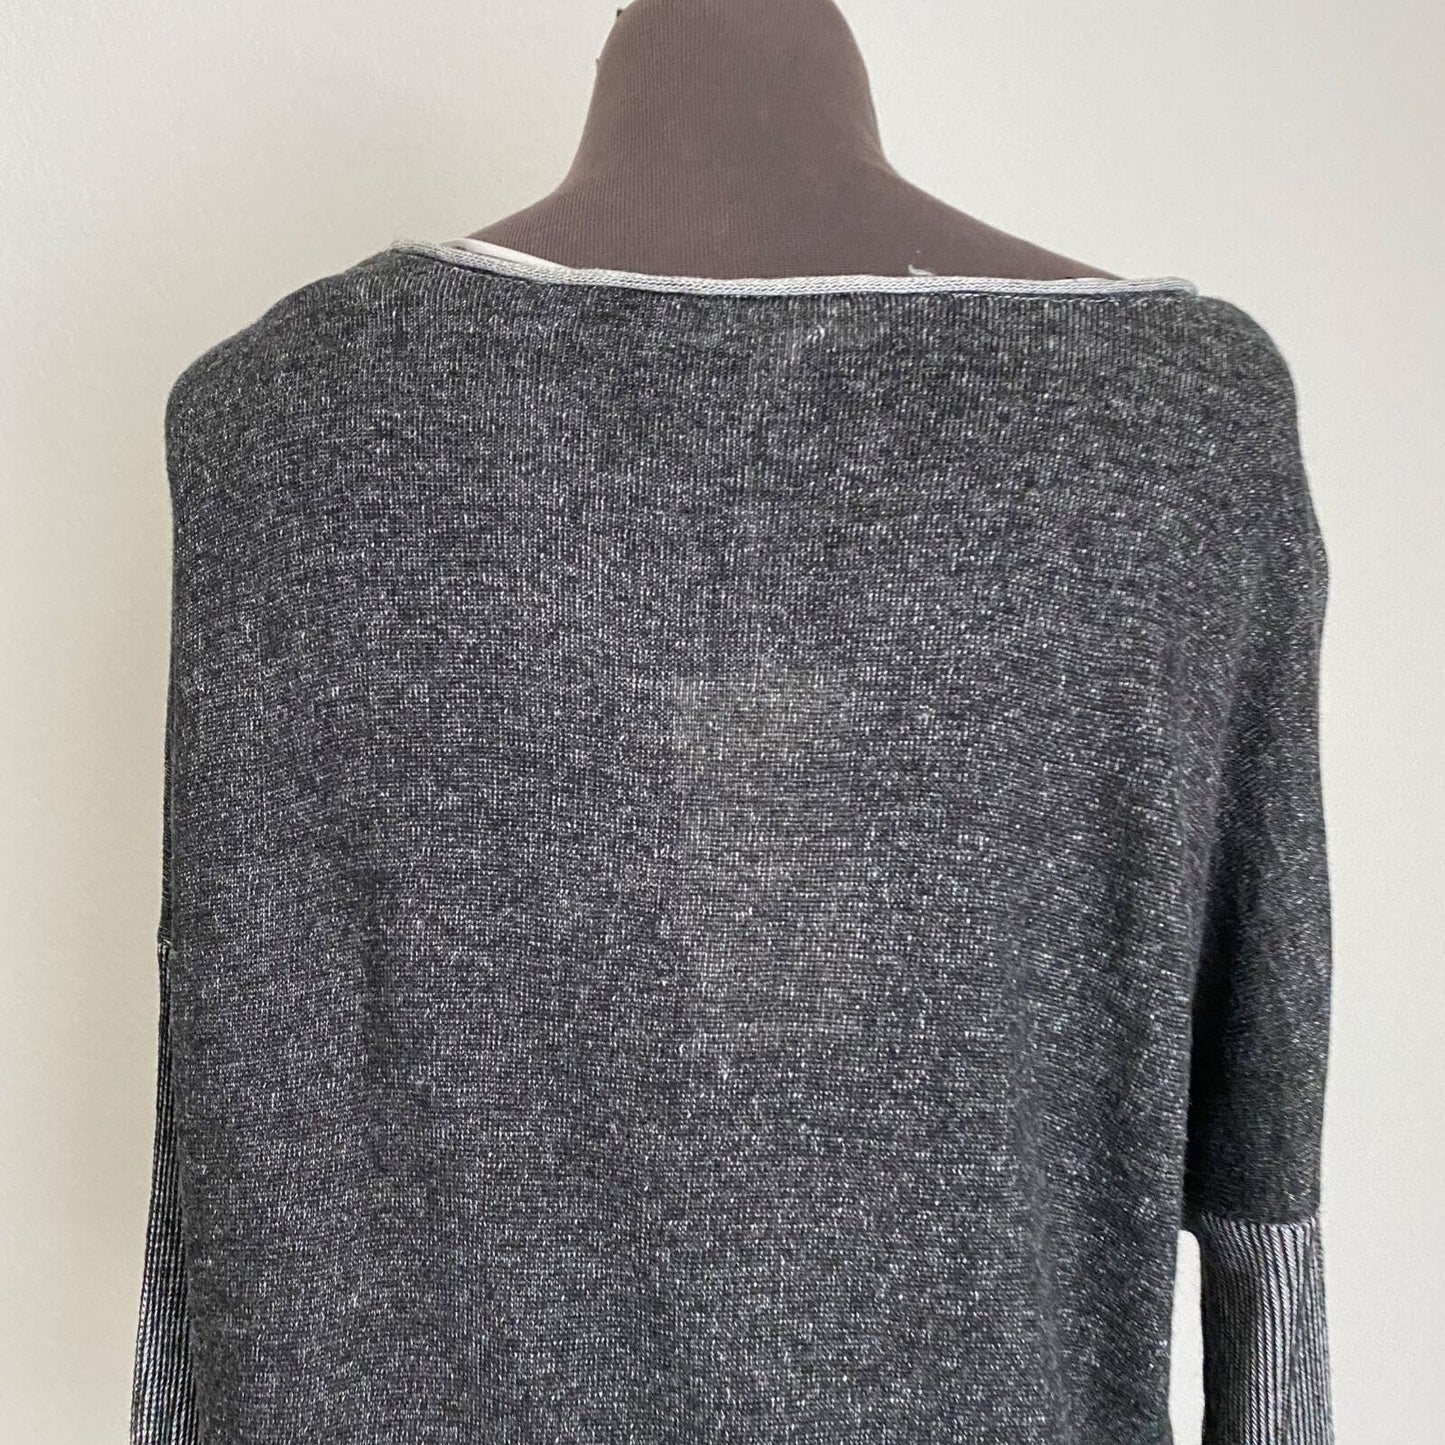 Two by Vince Camuto sz S gray boho scoop neck sweater NWT